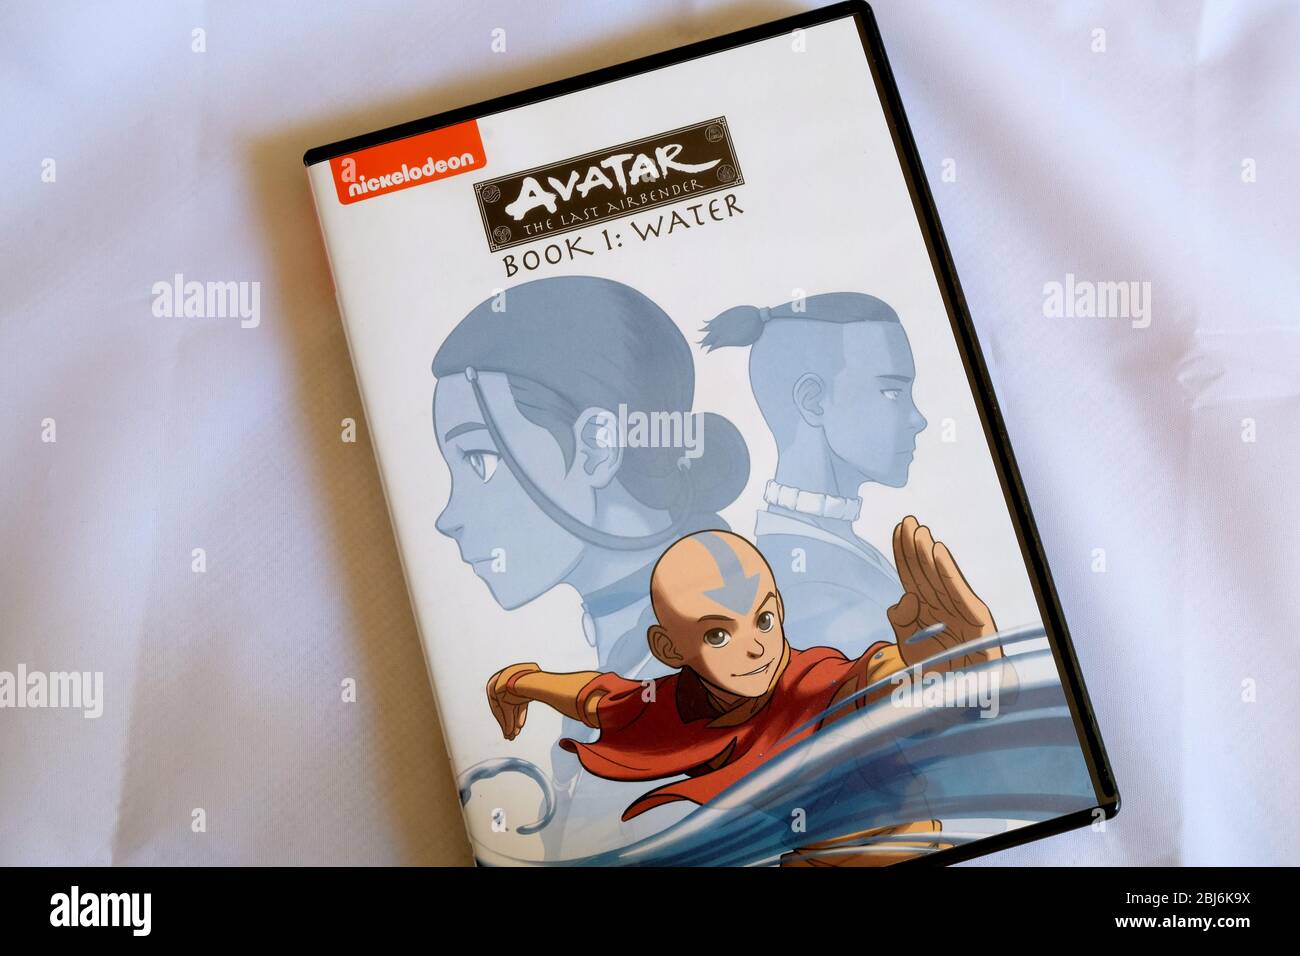 DVD box of Nickelodeon's 'Avatar - The Last Airbender: The Complete Series' animated television show released in 2015; Book 1: Water. Stock Photo